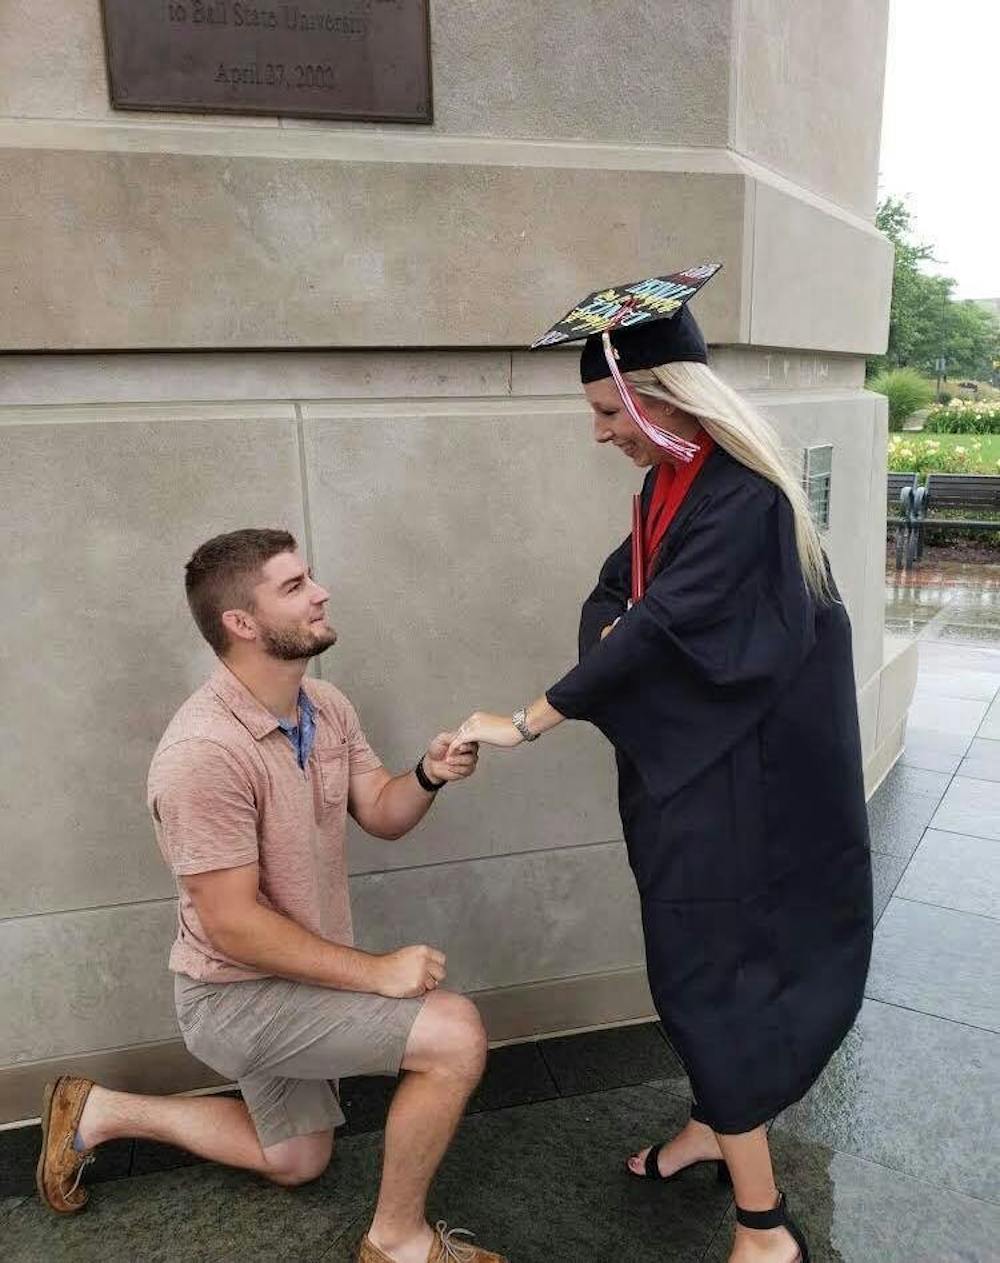 <p>Zeke Shultz proposed to his girlfriend Kari Scherer underneath Shafer Tower after summer commencement. The couple met during Scherer's freshman year at Ball State. <strong>Kari Scherer, Photo Provided.&nbsp;</strong></p>